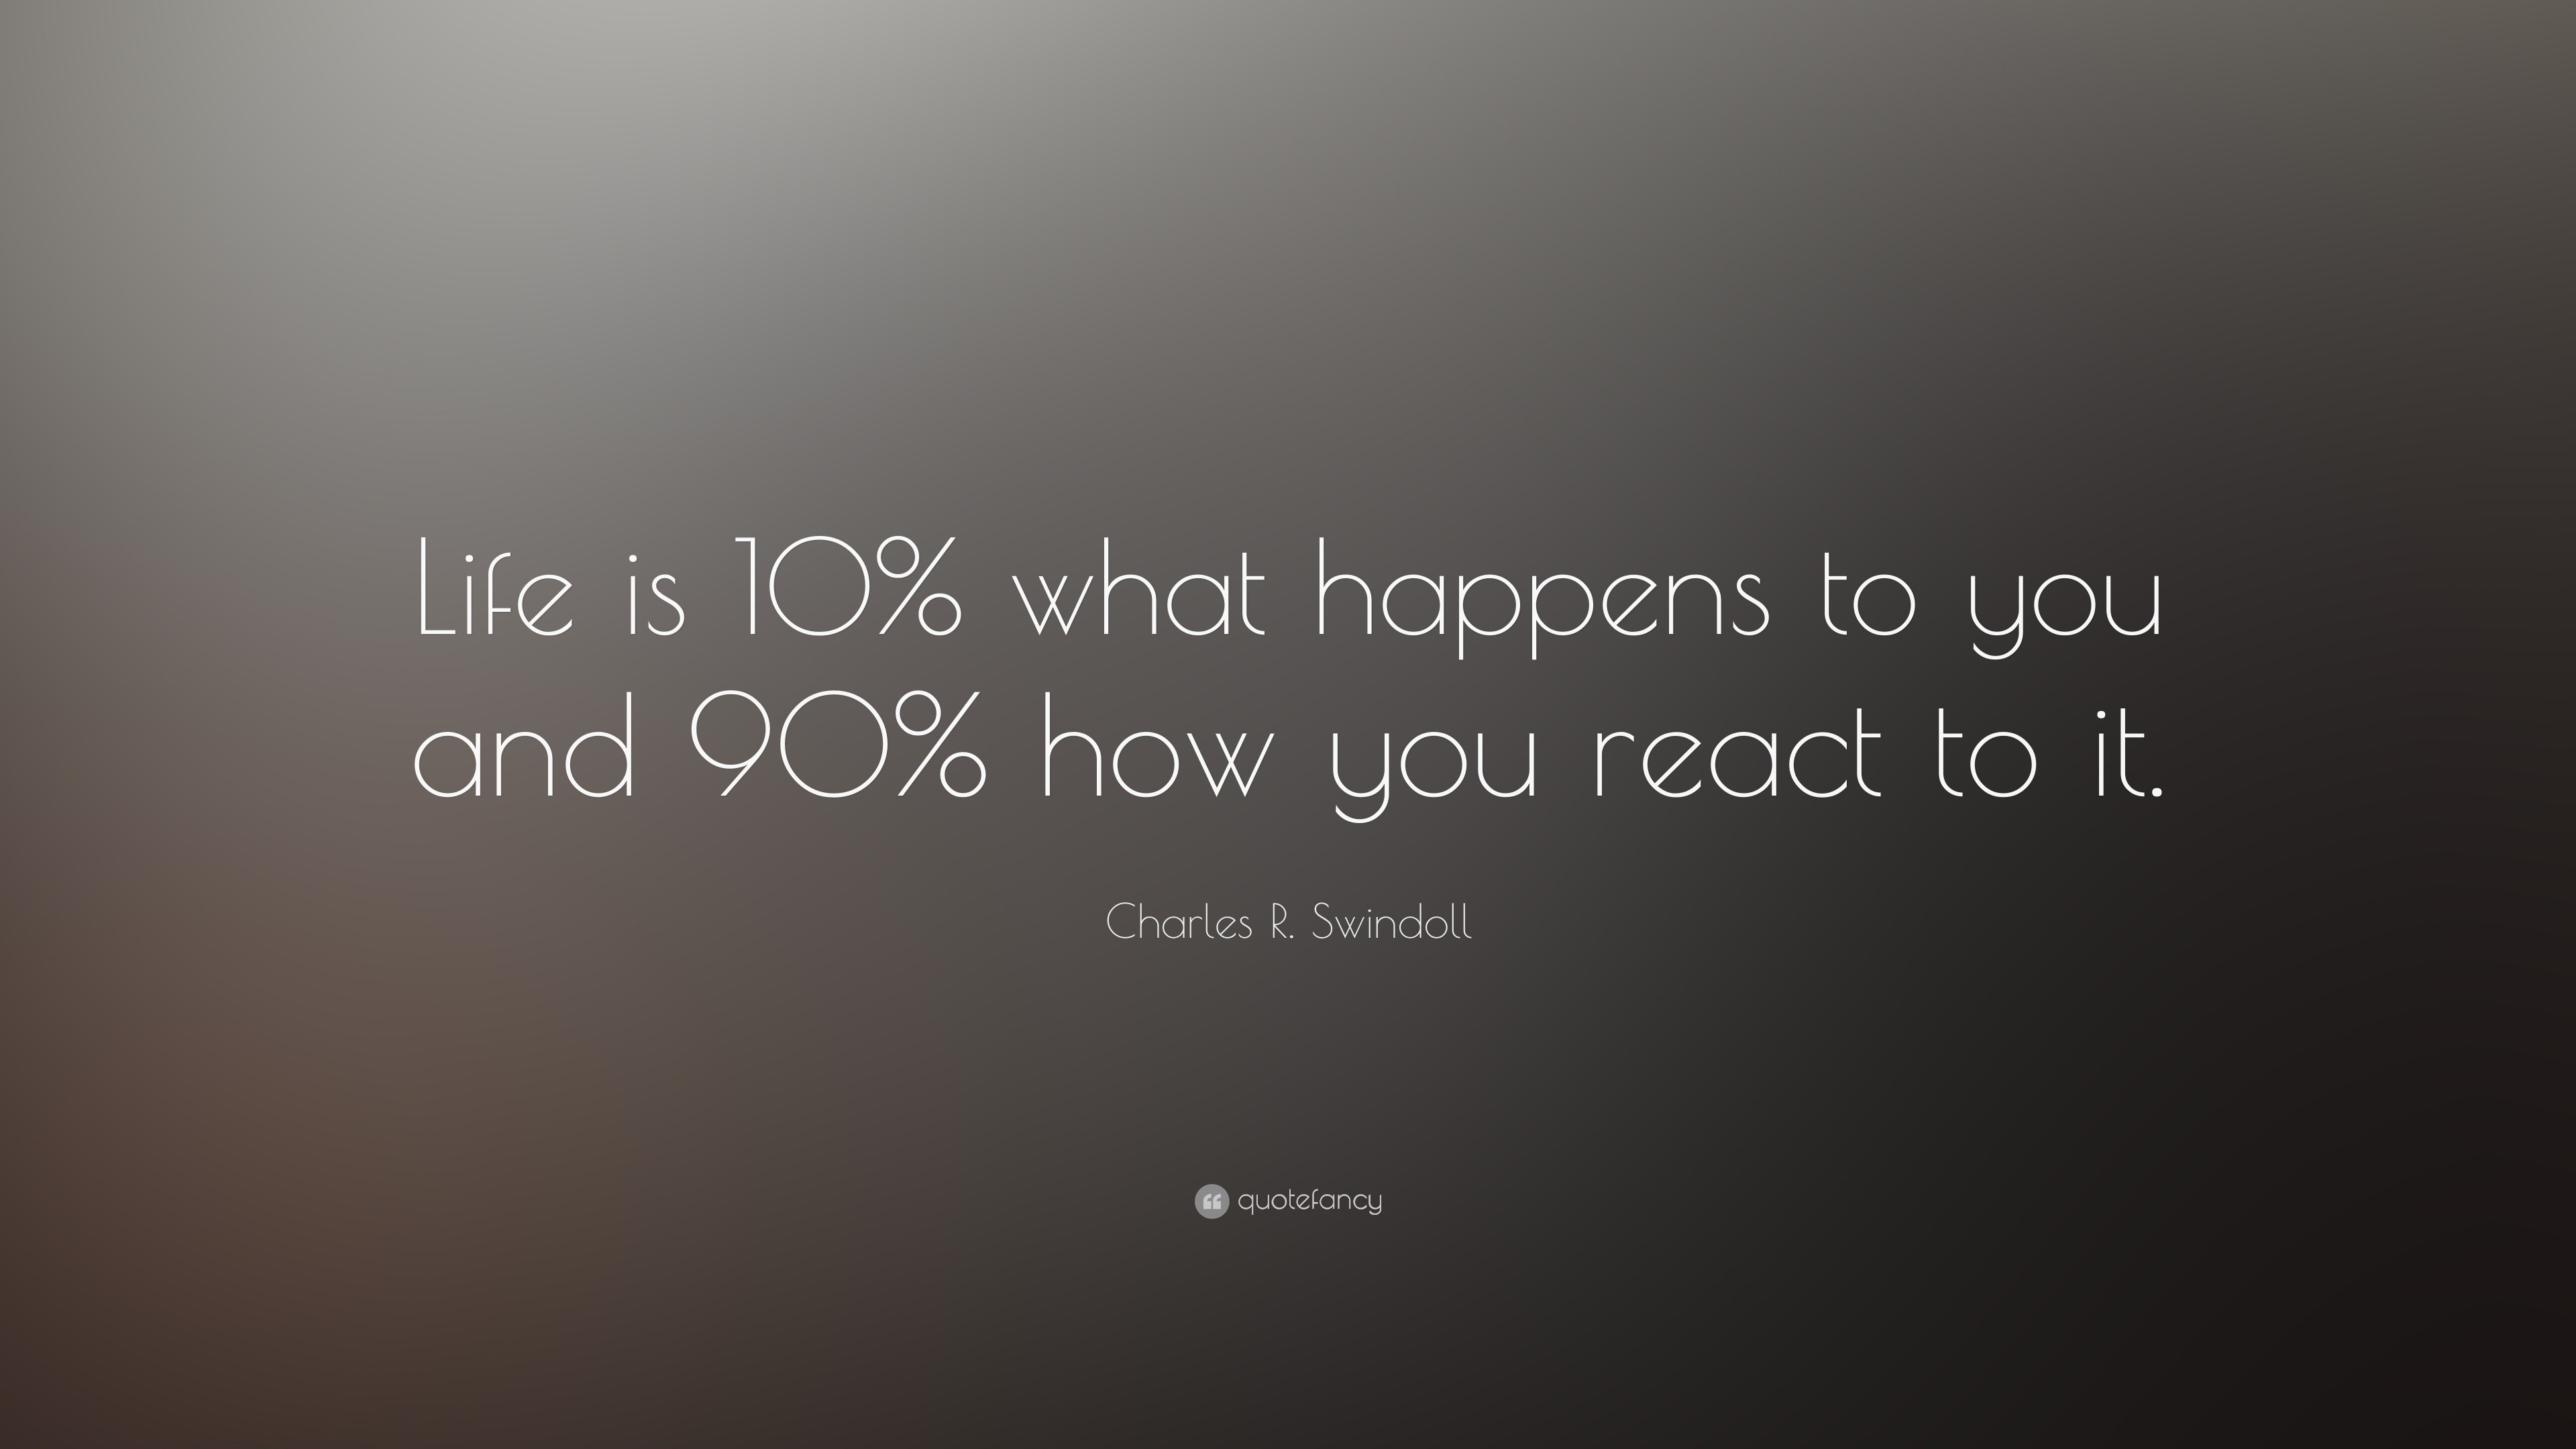 Charles R. Swindoll Quote: “Life is 10% what happens to you and 90% how